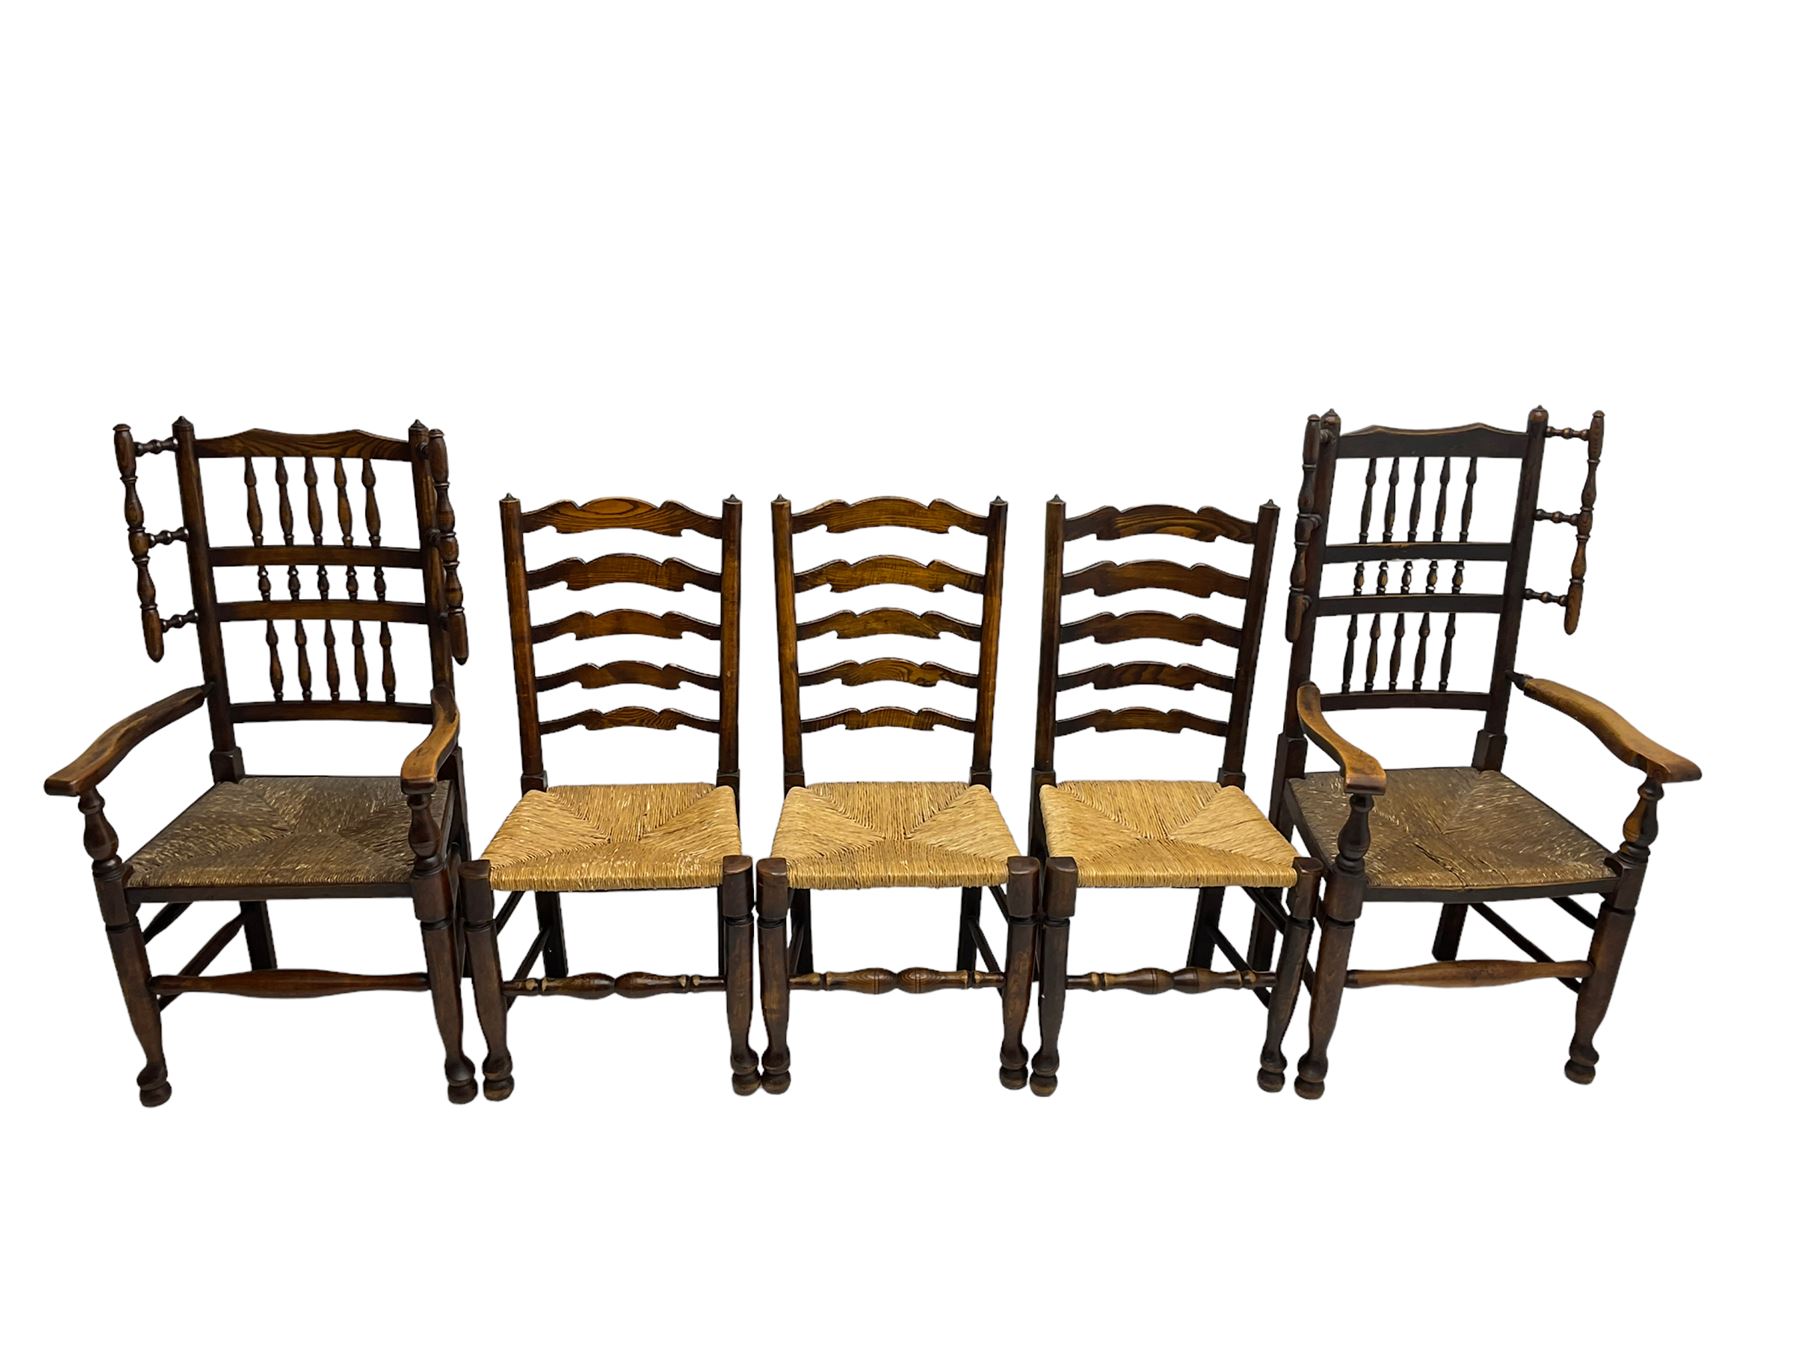 Harlequin set of nine country elm and beech chairs - pair 19th century spindle back carver armchairs - Image 4 of 13